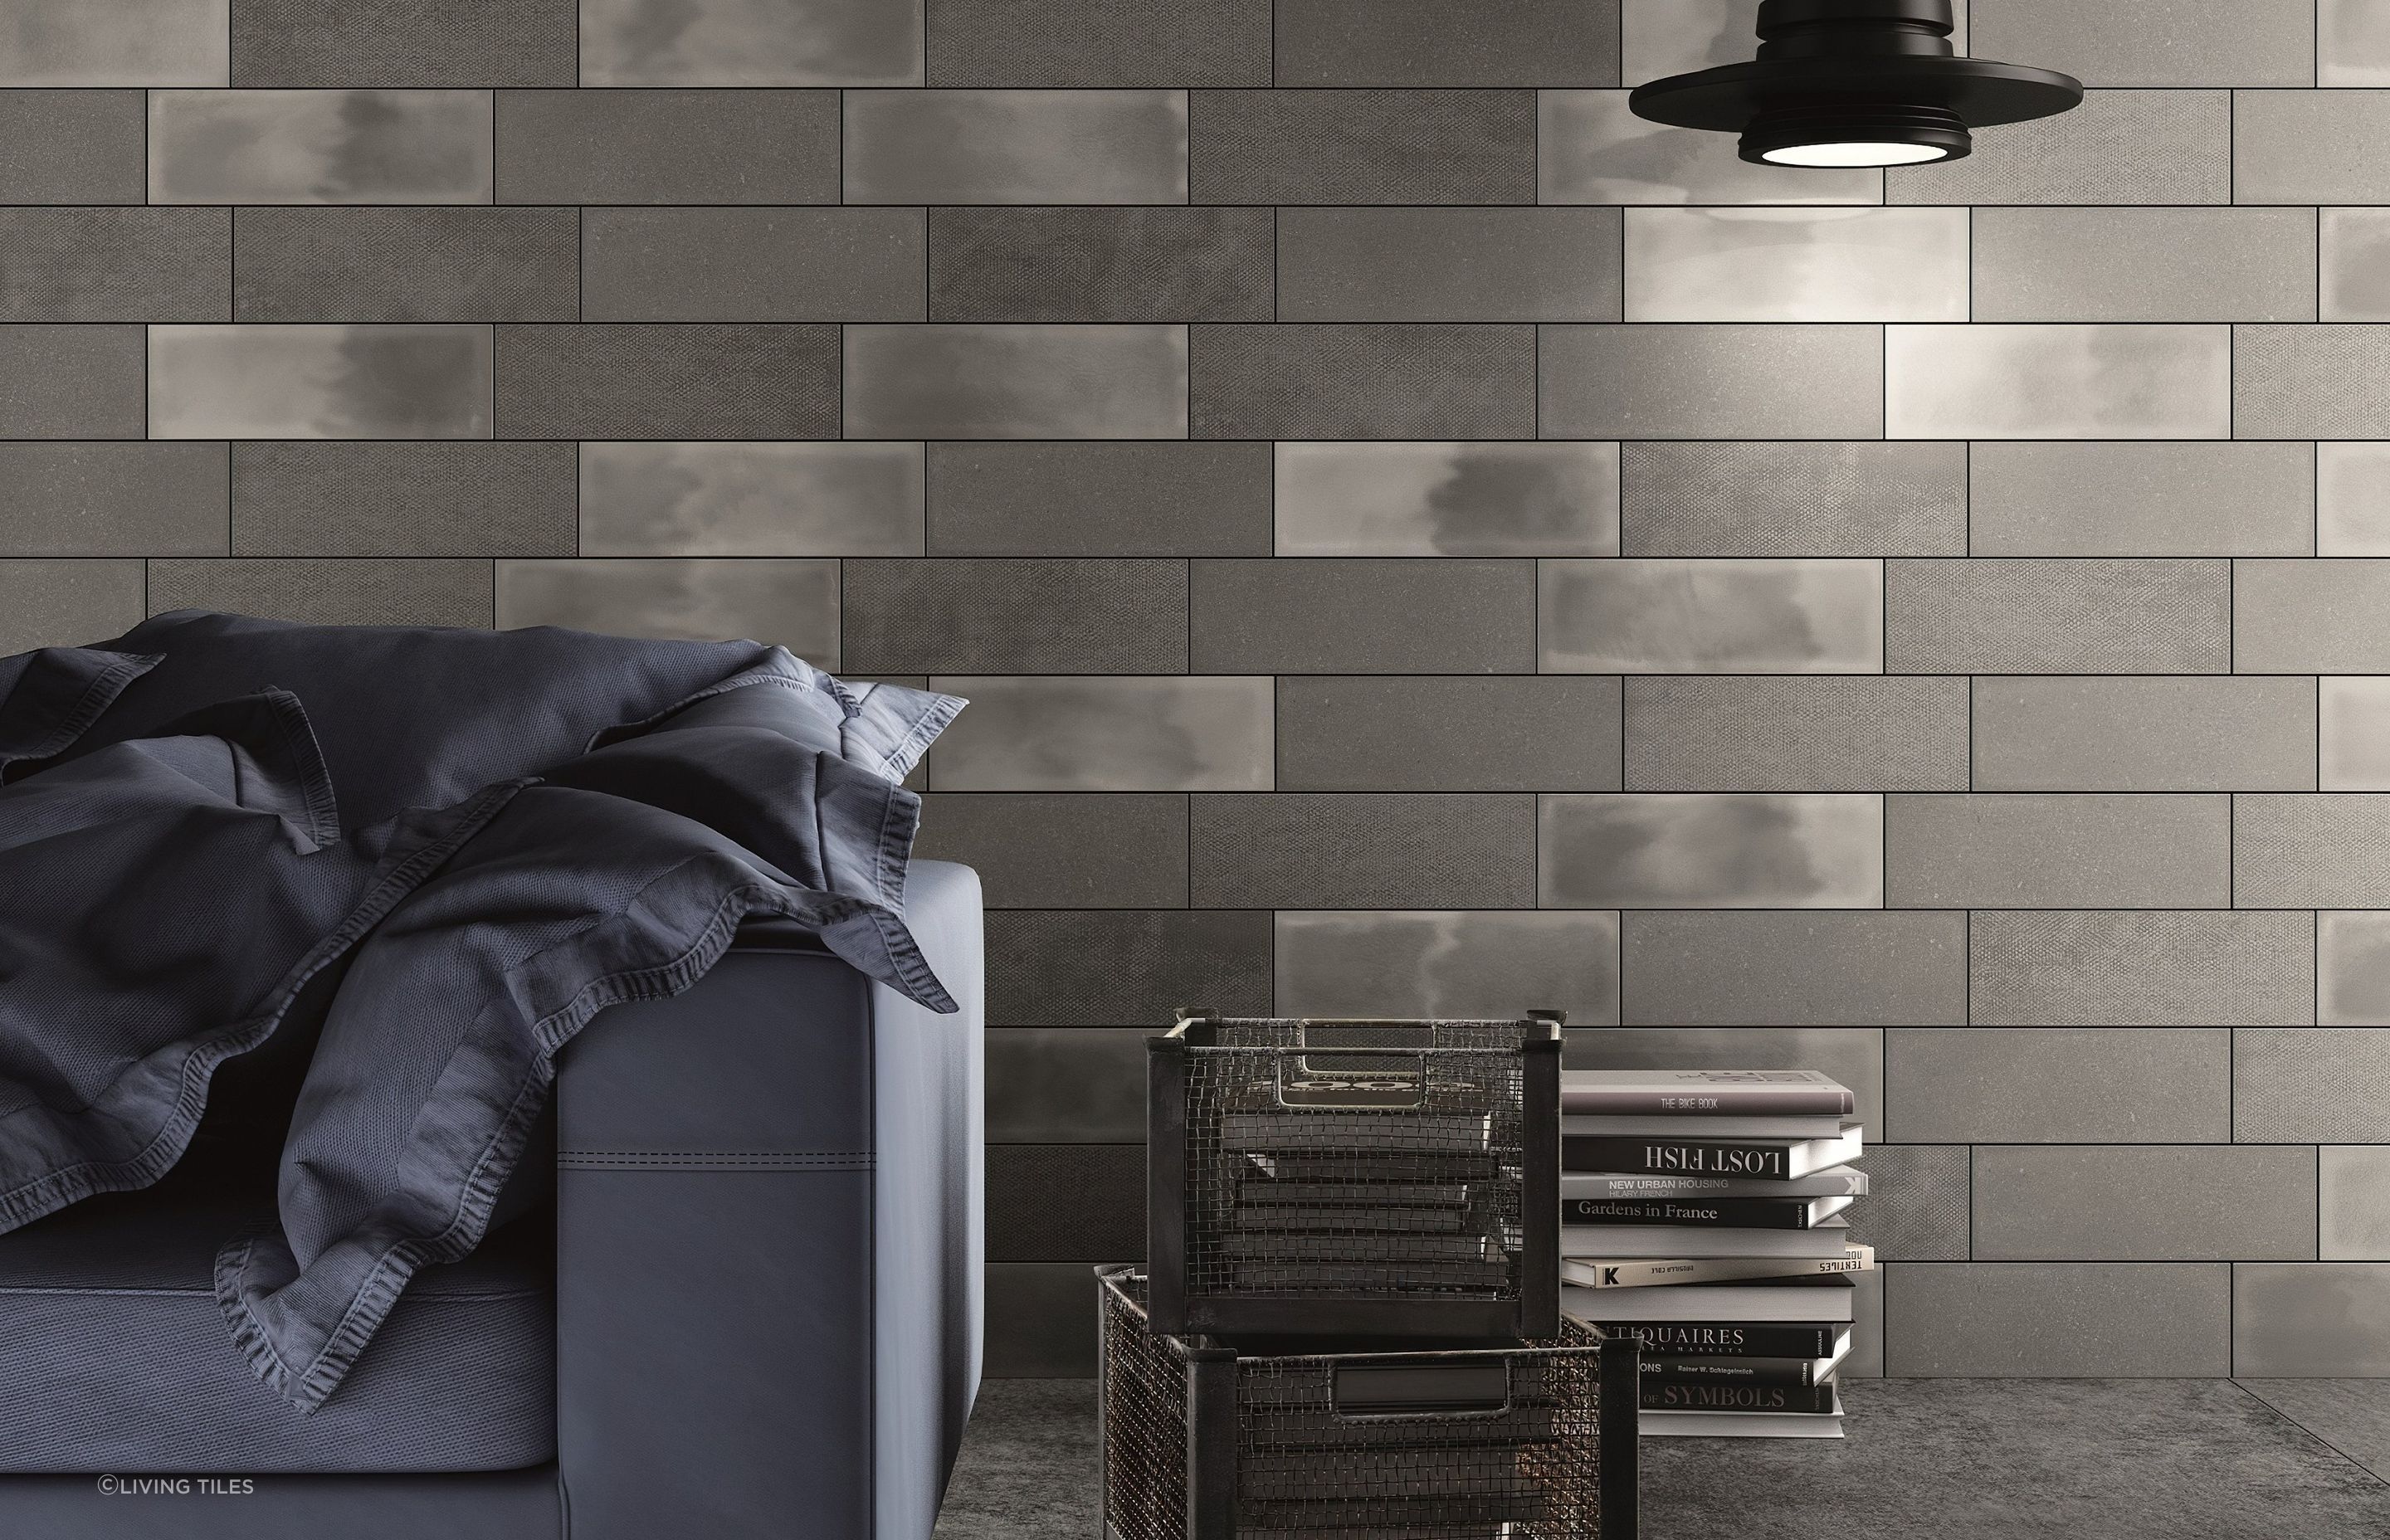 The grey Living Camp Wall tiles work well with this dark charcoal and light, creating a sophisticated industrial-looking interior.